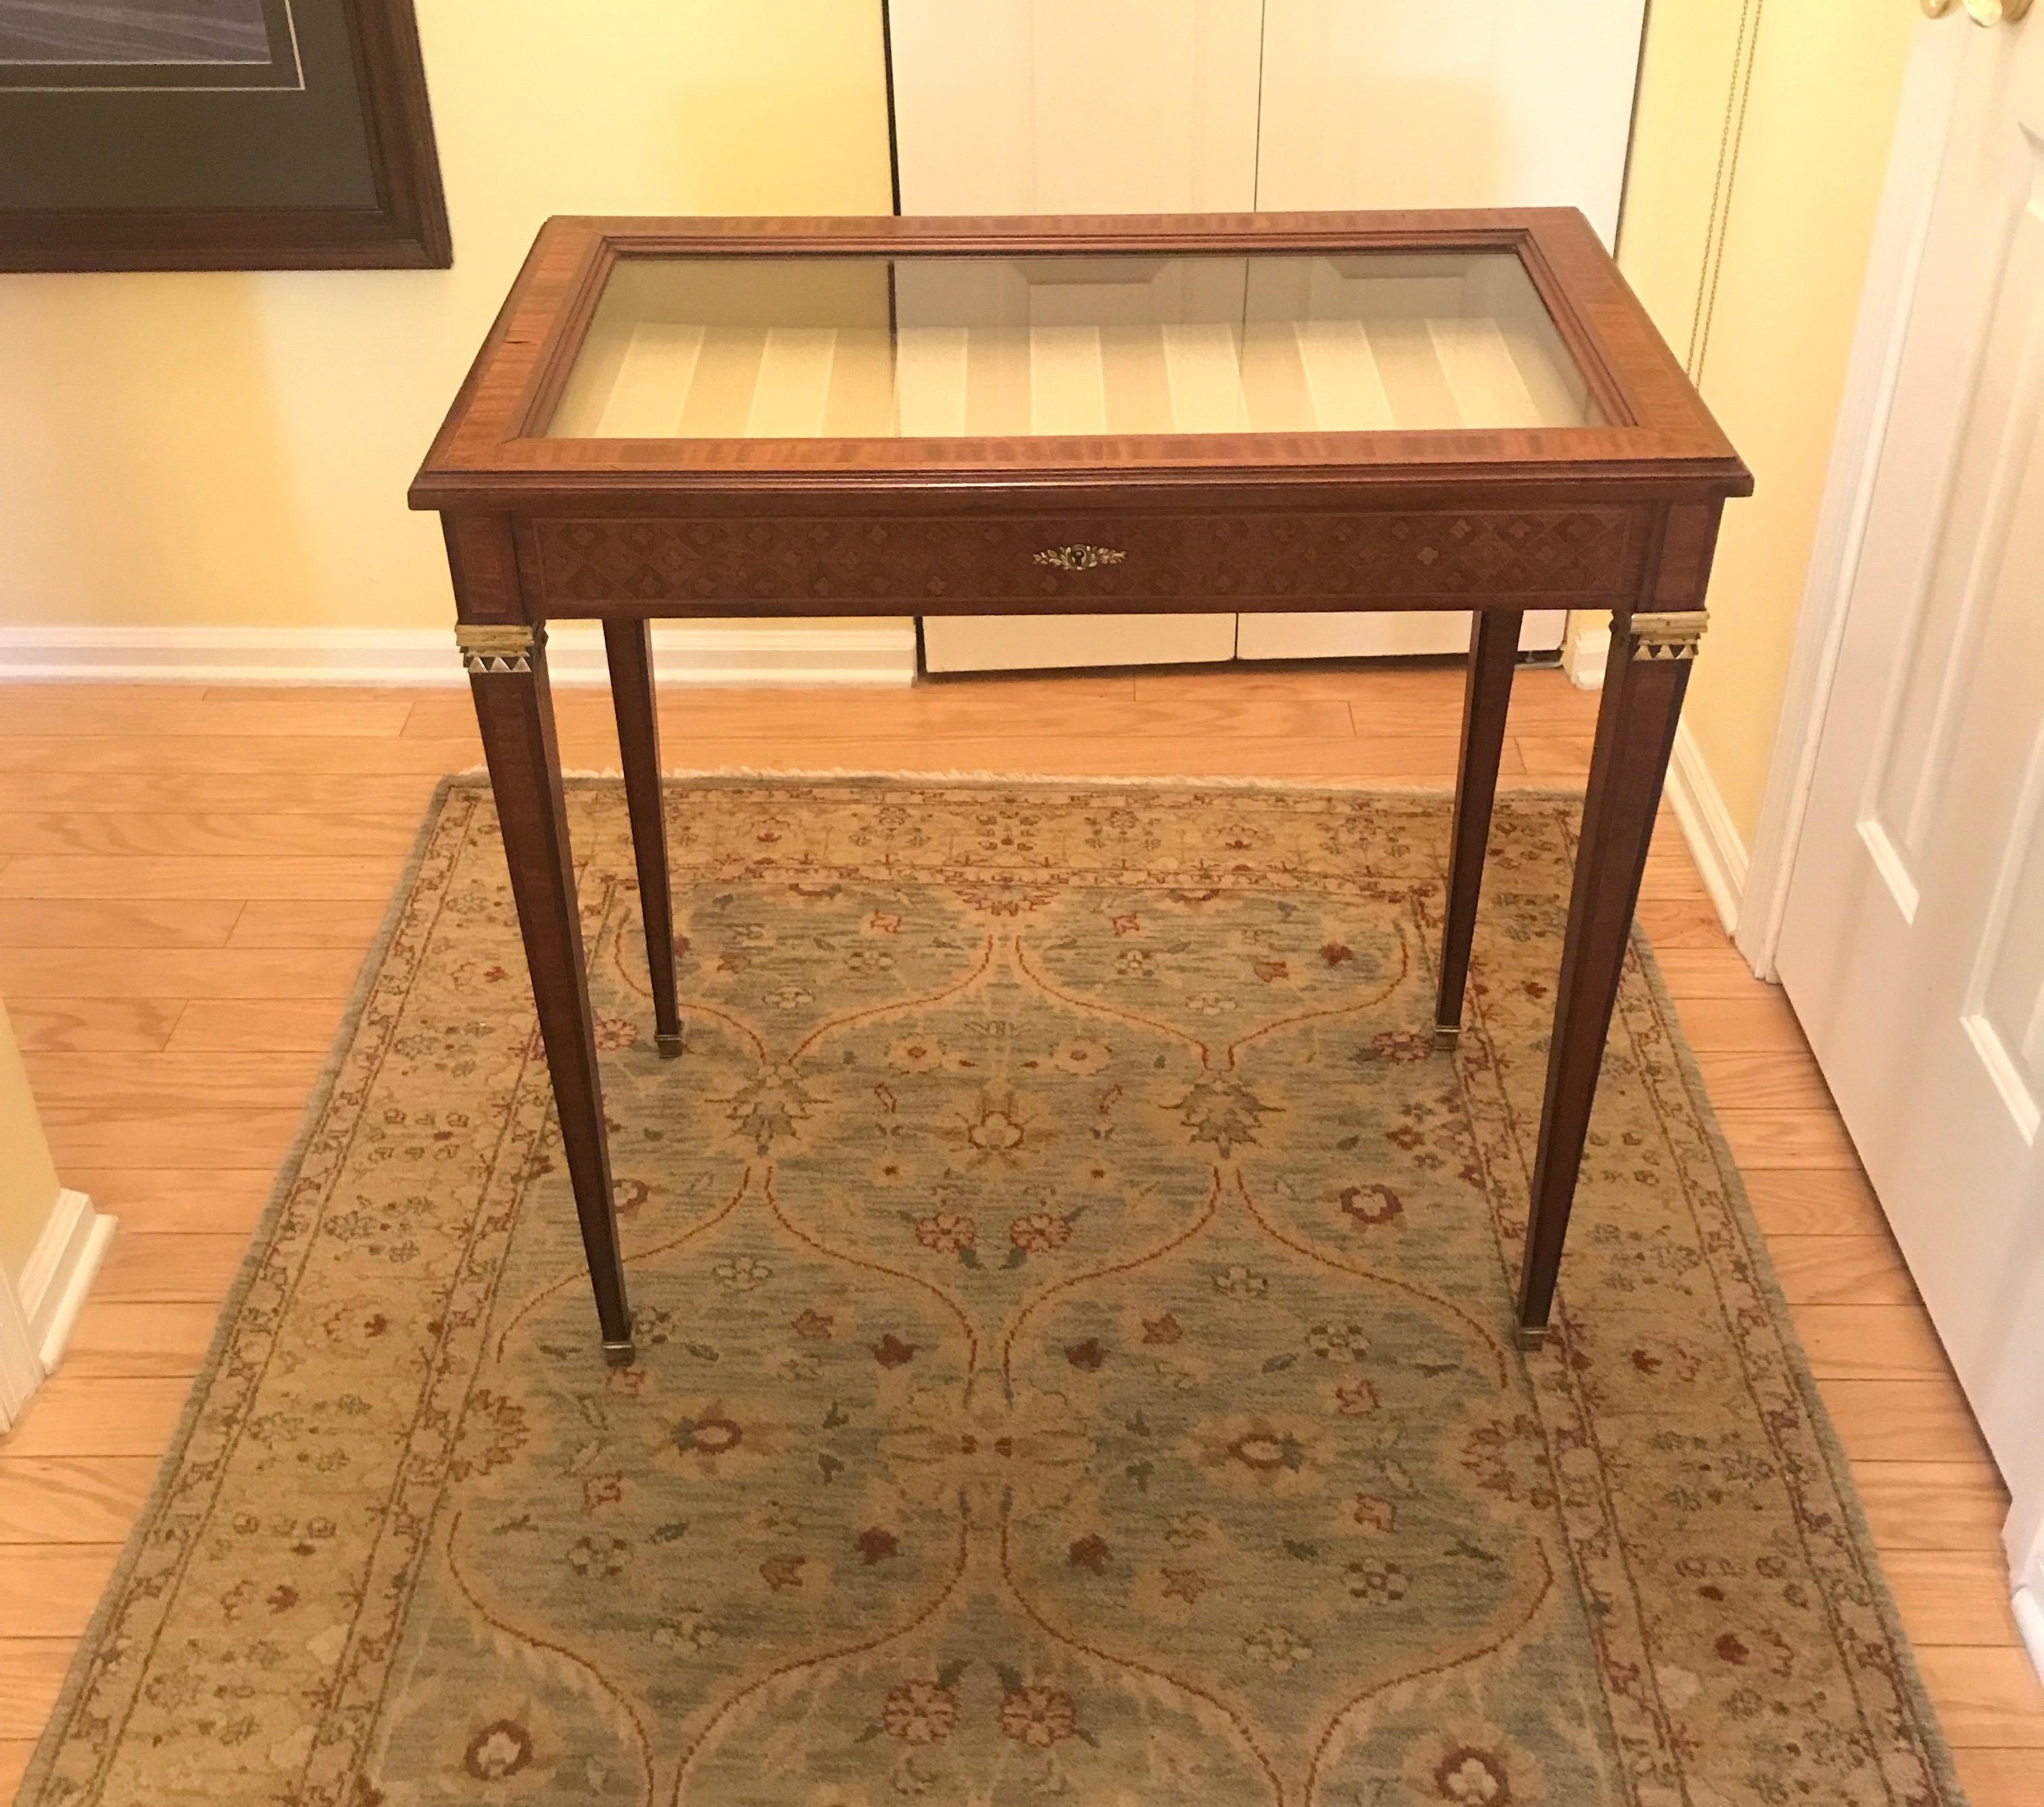 Elegant display table with mahogany with crossbanded inlay and marquetry inlaid sides. The glass display top supported by inlaid tapering legs with a satin broad stripe damask pad insert. Perfect to display a collection or jewelry in excellent well